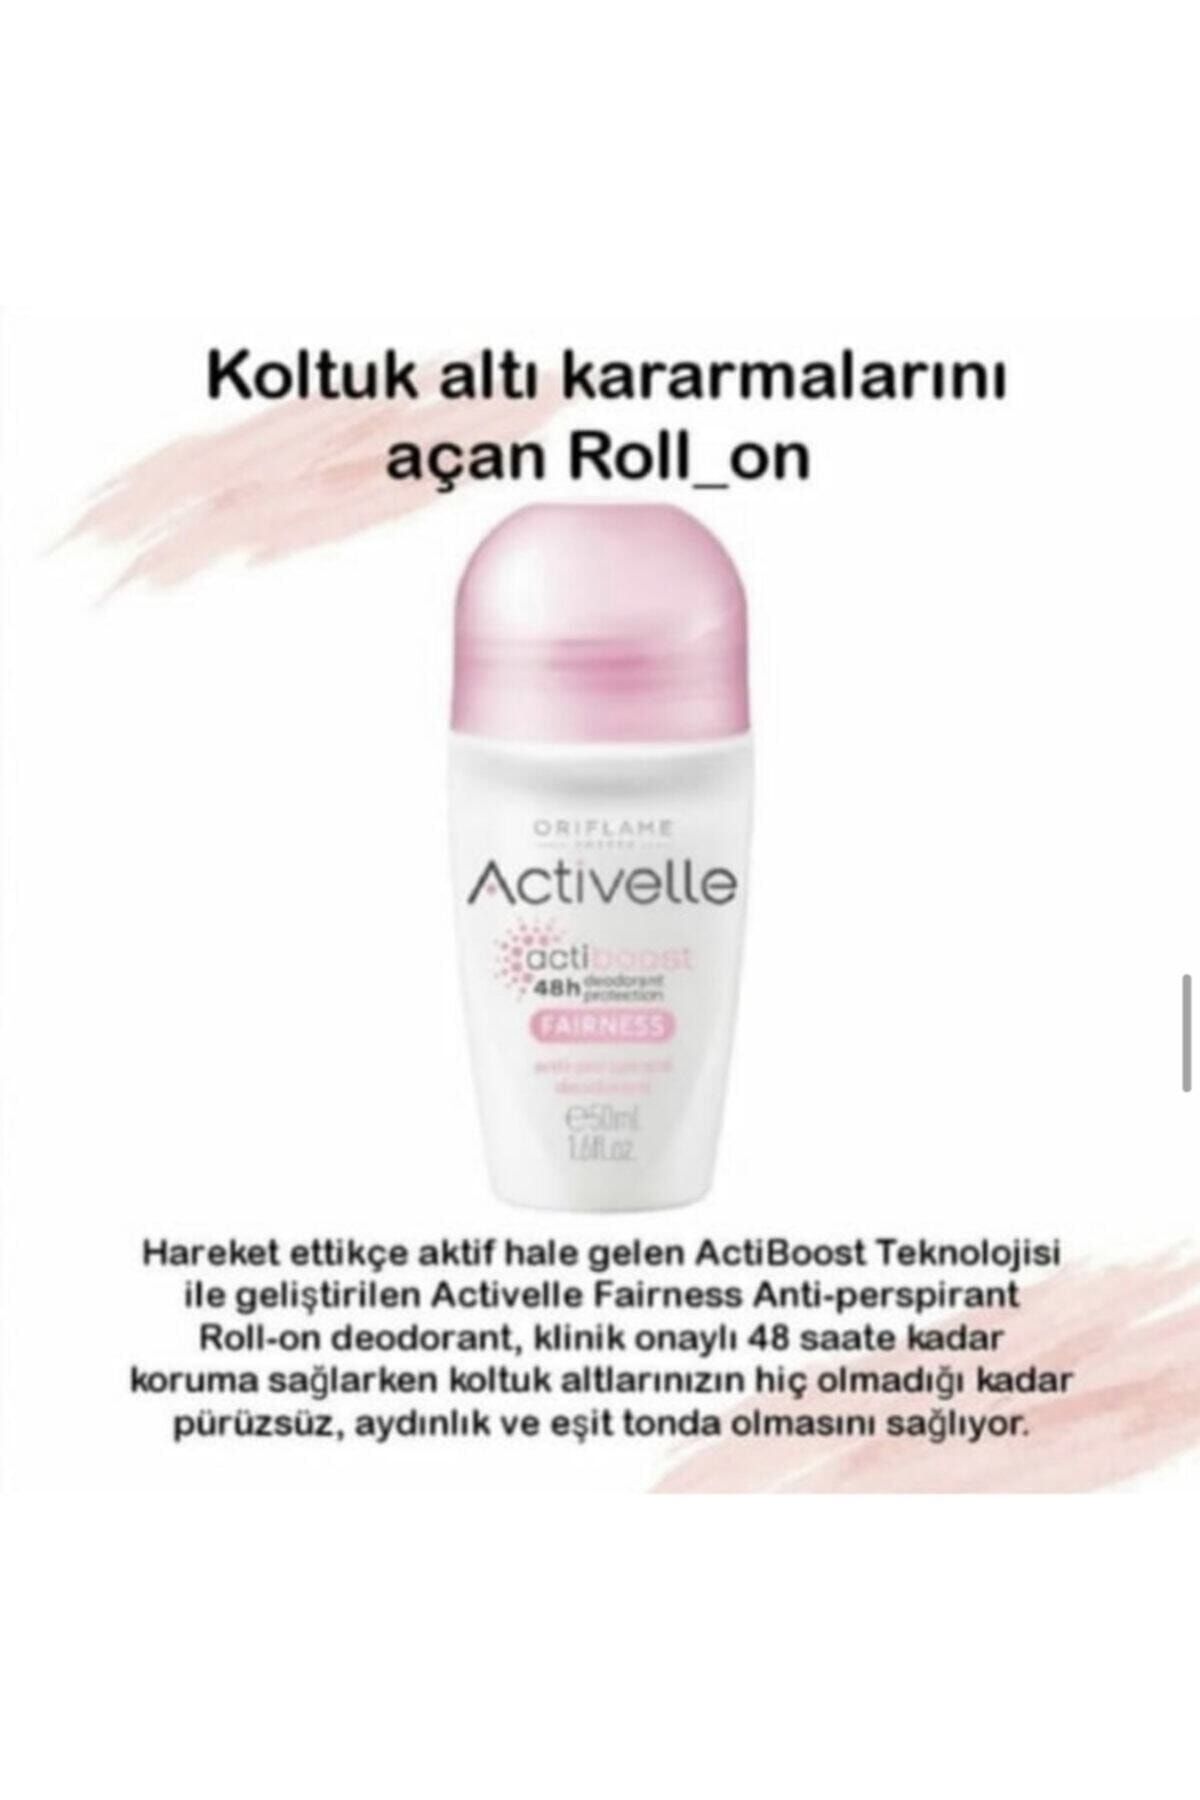 Oriflame Activelle Fairness Anti-perspirant Roll-on